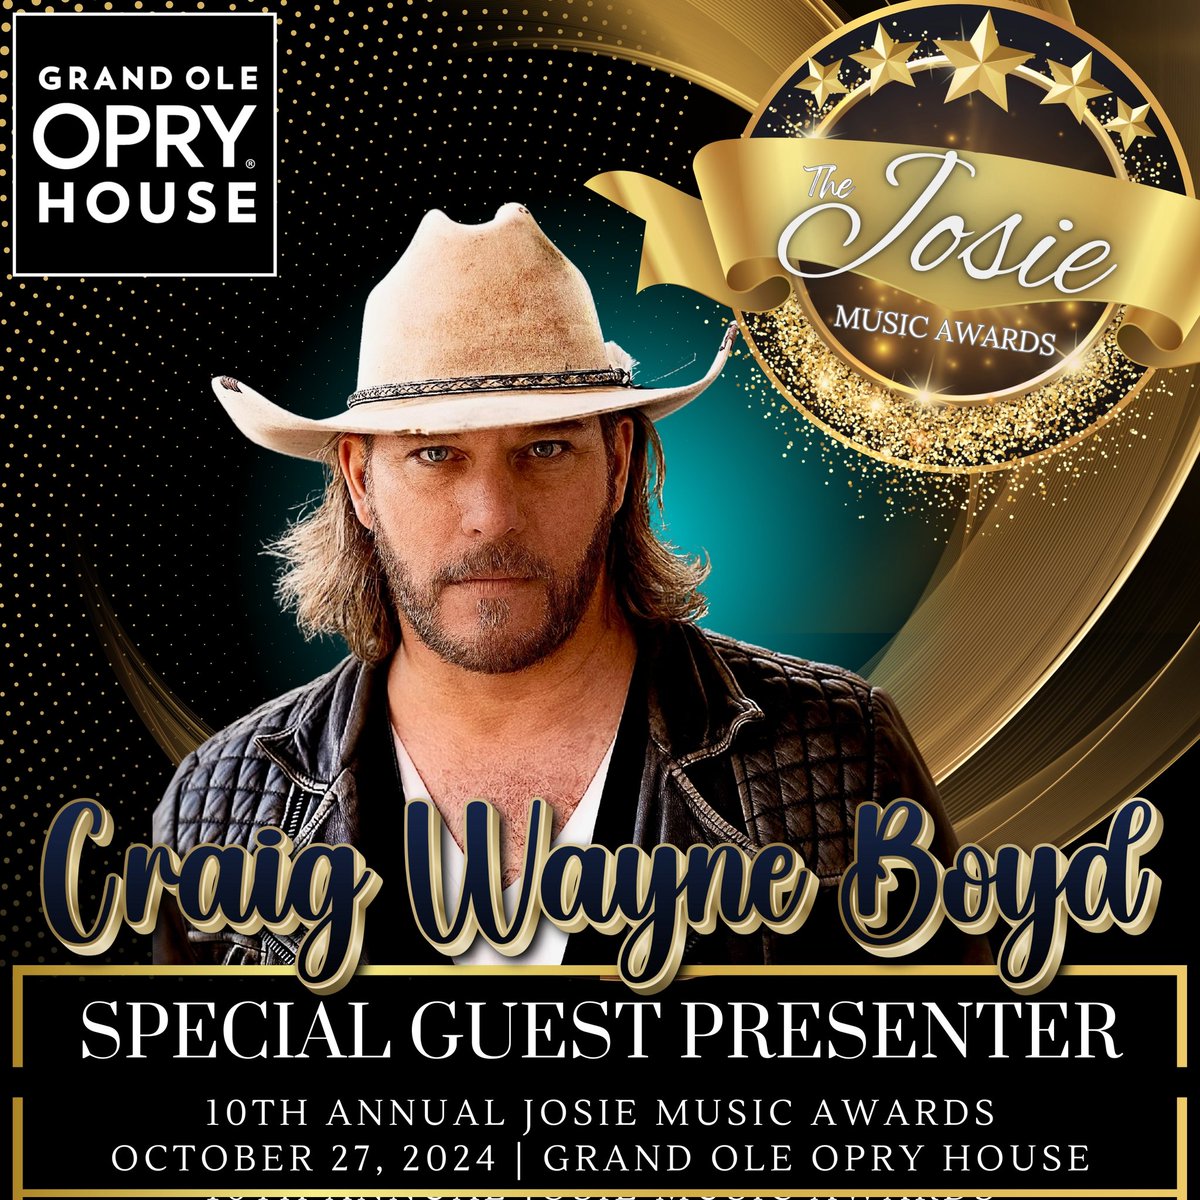 ANNOUNCEMENT: We are proud to announce another special guest presenter for the 10th Annual Josie Music Awards, season 7 winner of 'The Voice' @CWBYall! Stay tuned as we continue to announce special guest presenters leading up to our big 10 Year Anniversary at the @Opry House.